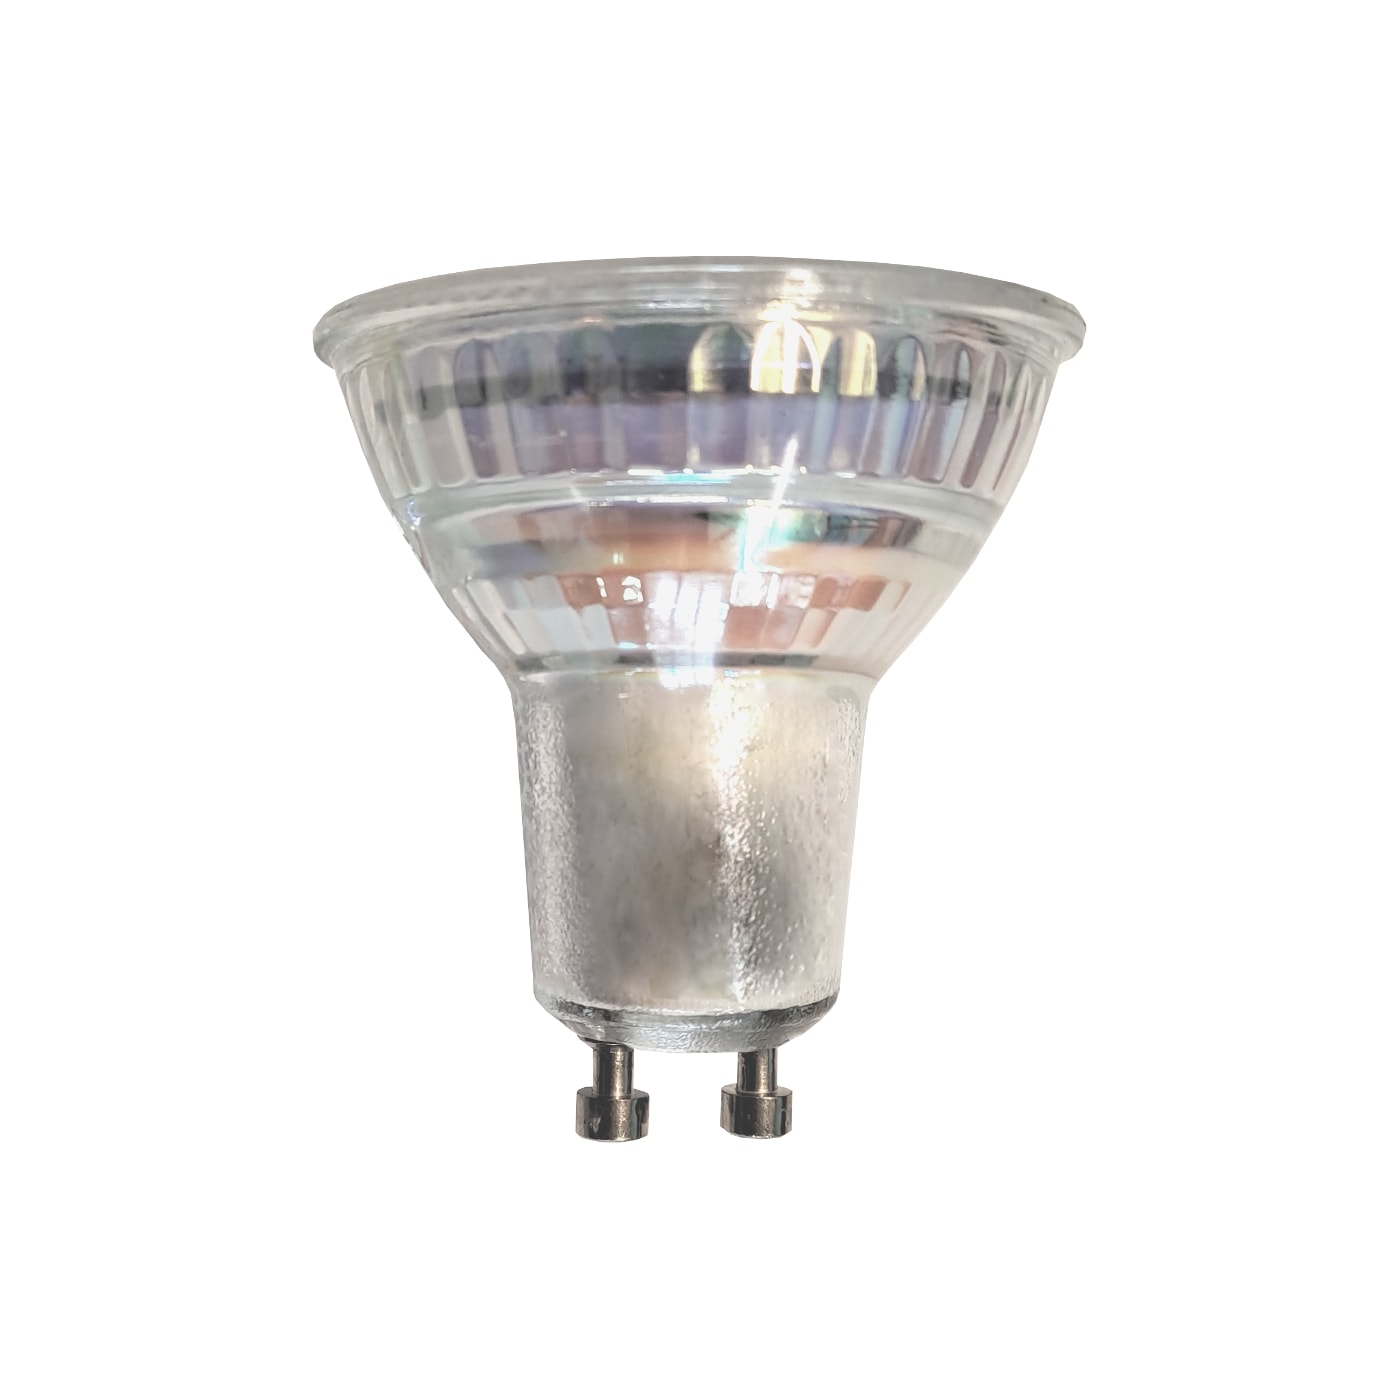 Product image of GE GU10 LED Dimmable Lamp